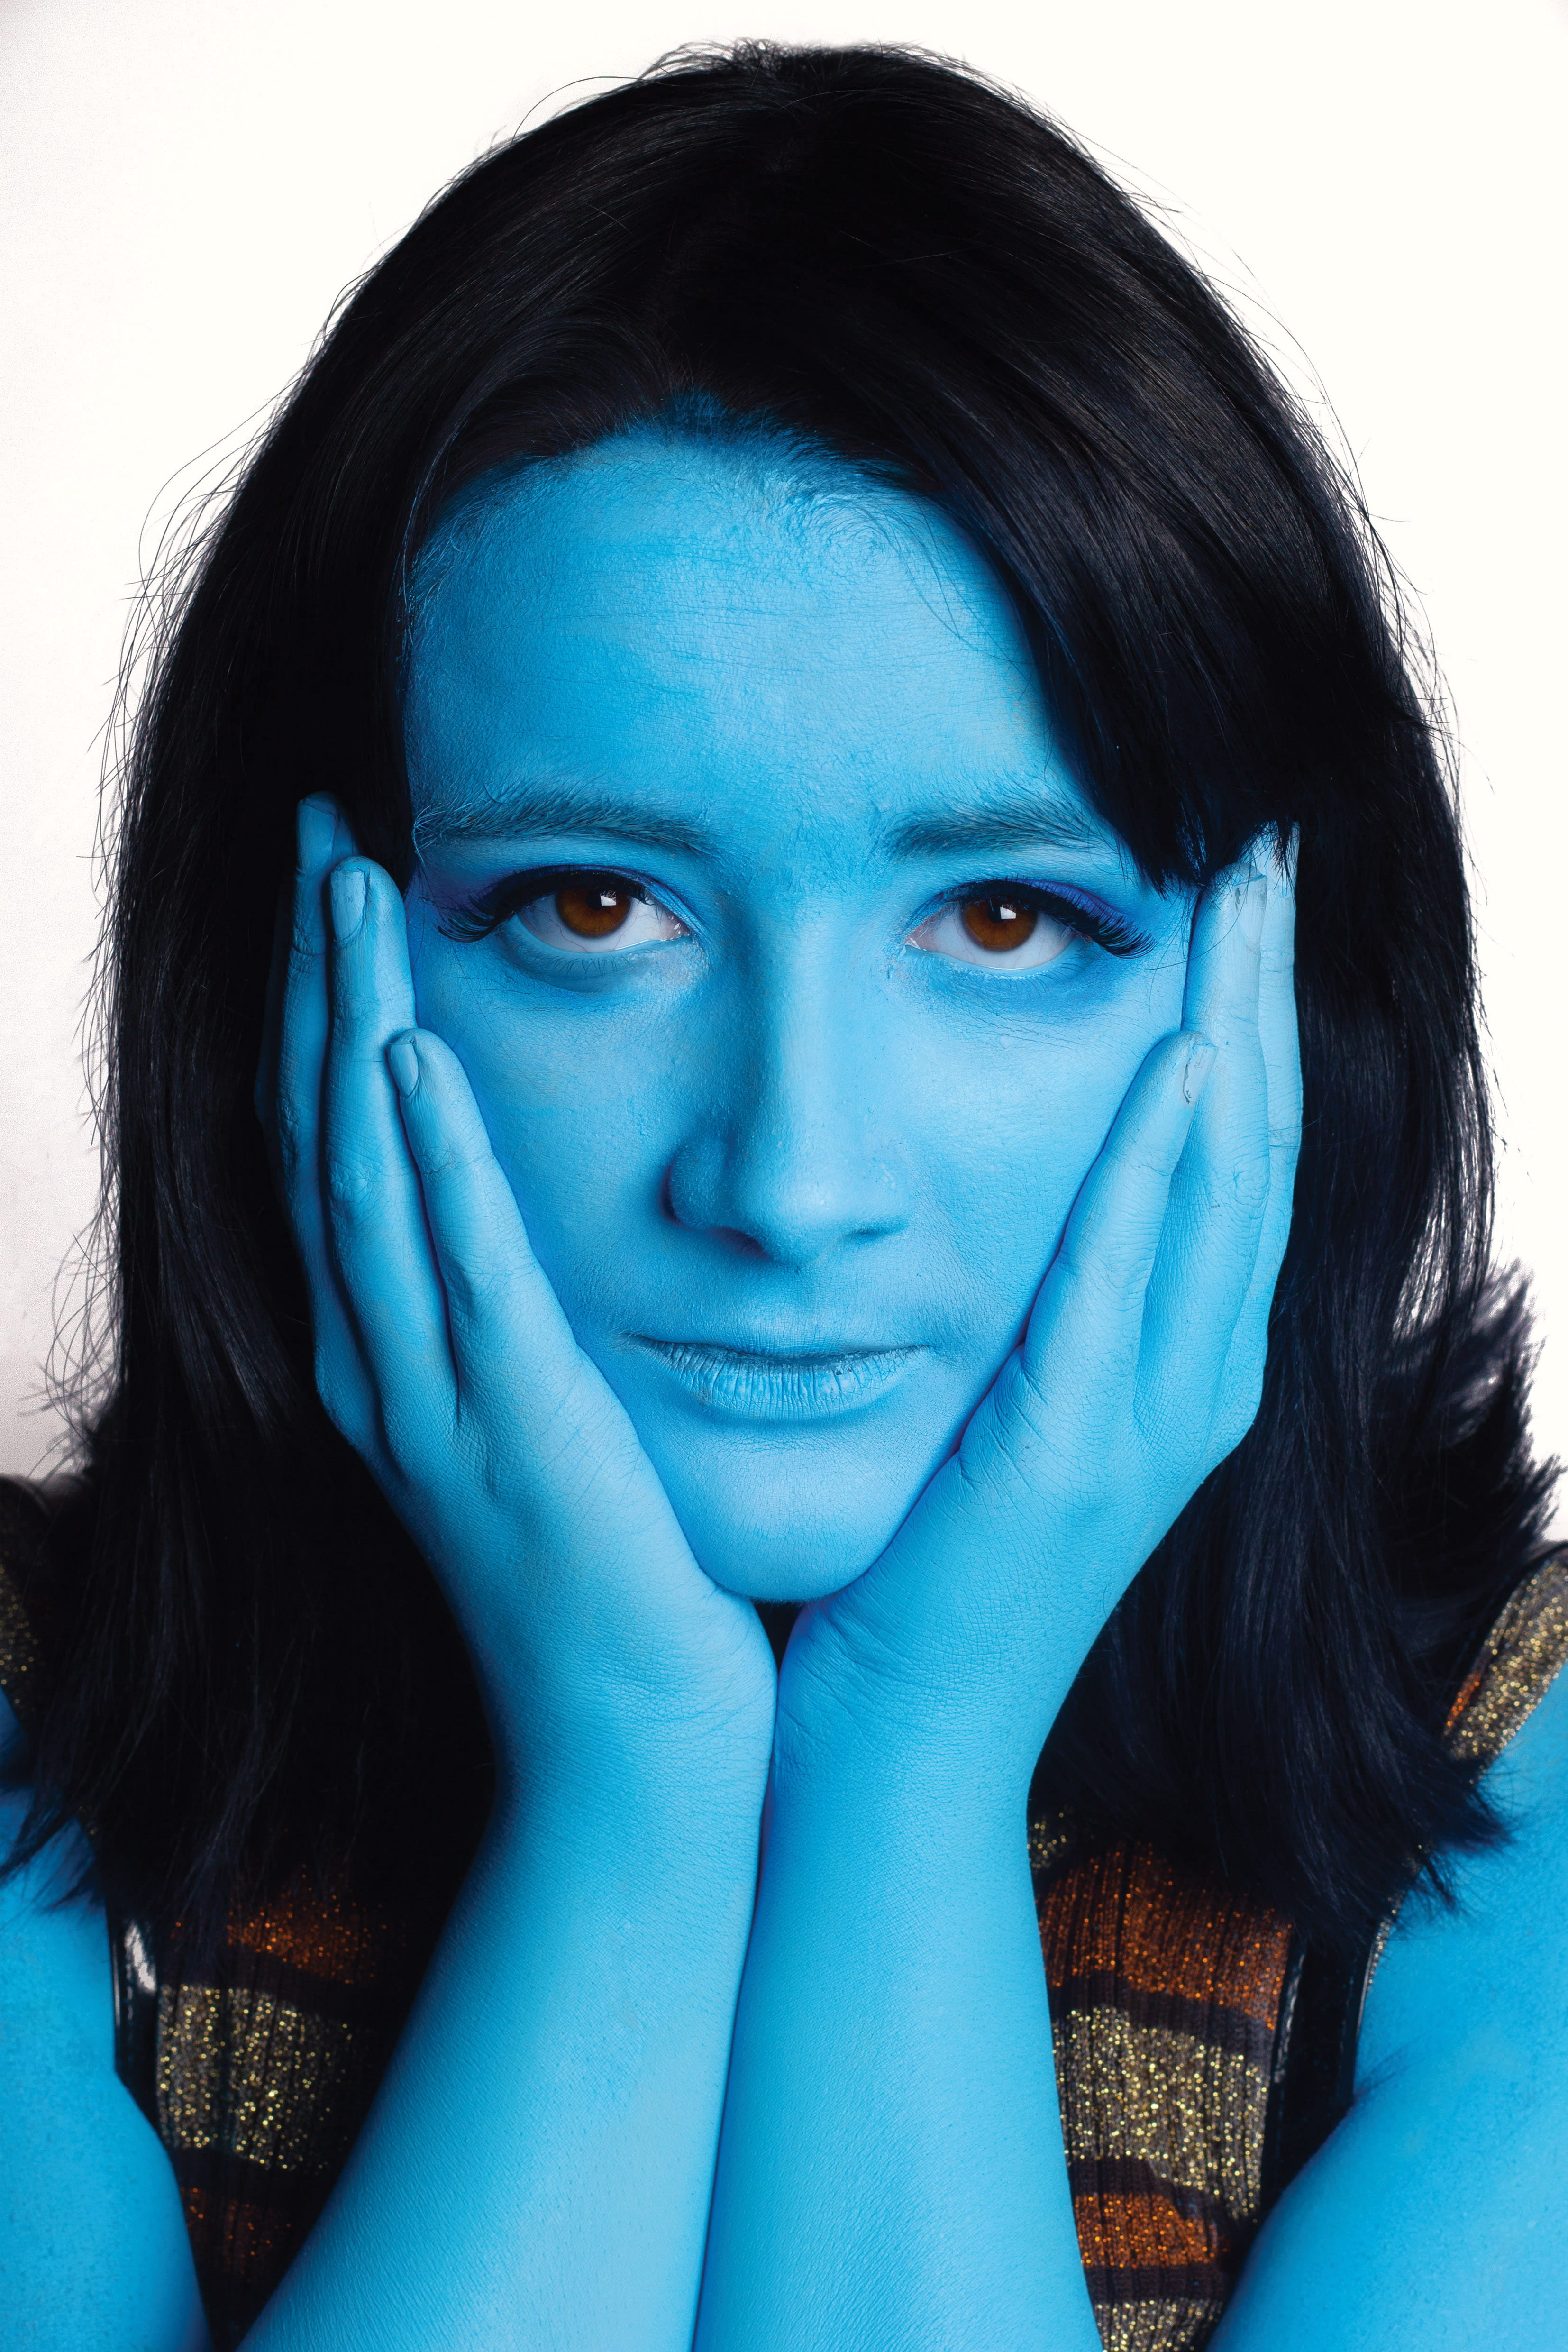 A woman with blue skin, placing her palms on her cheeks.